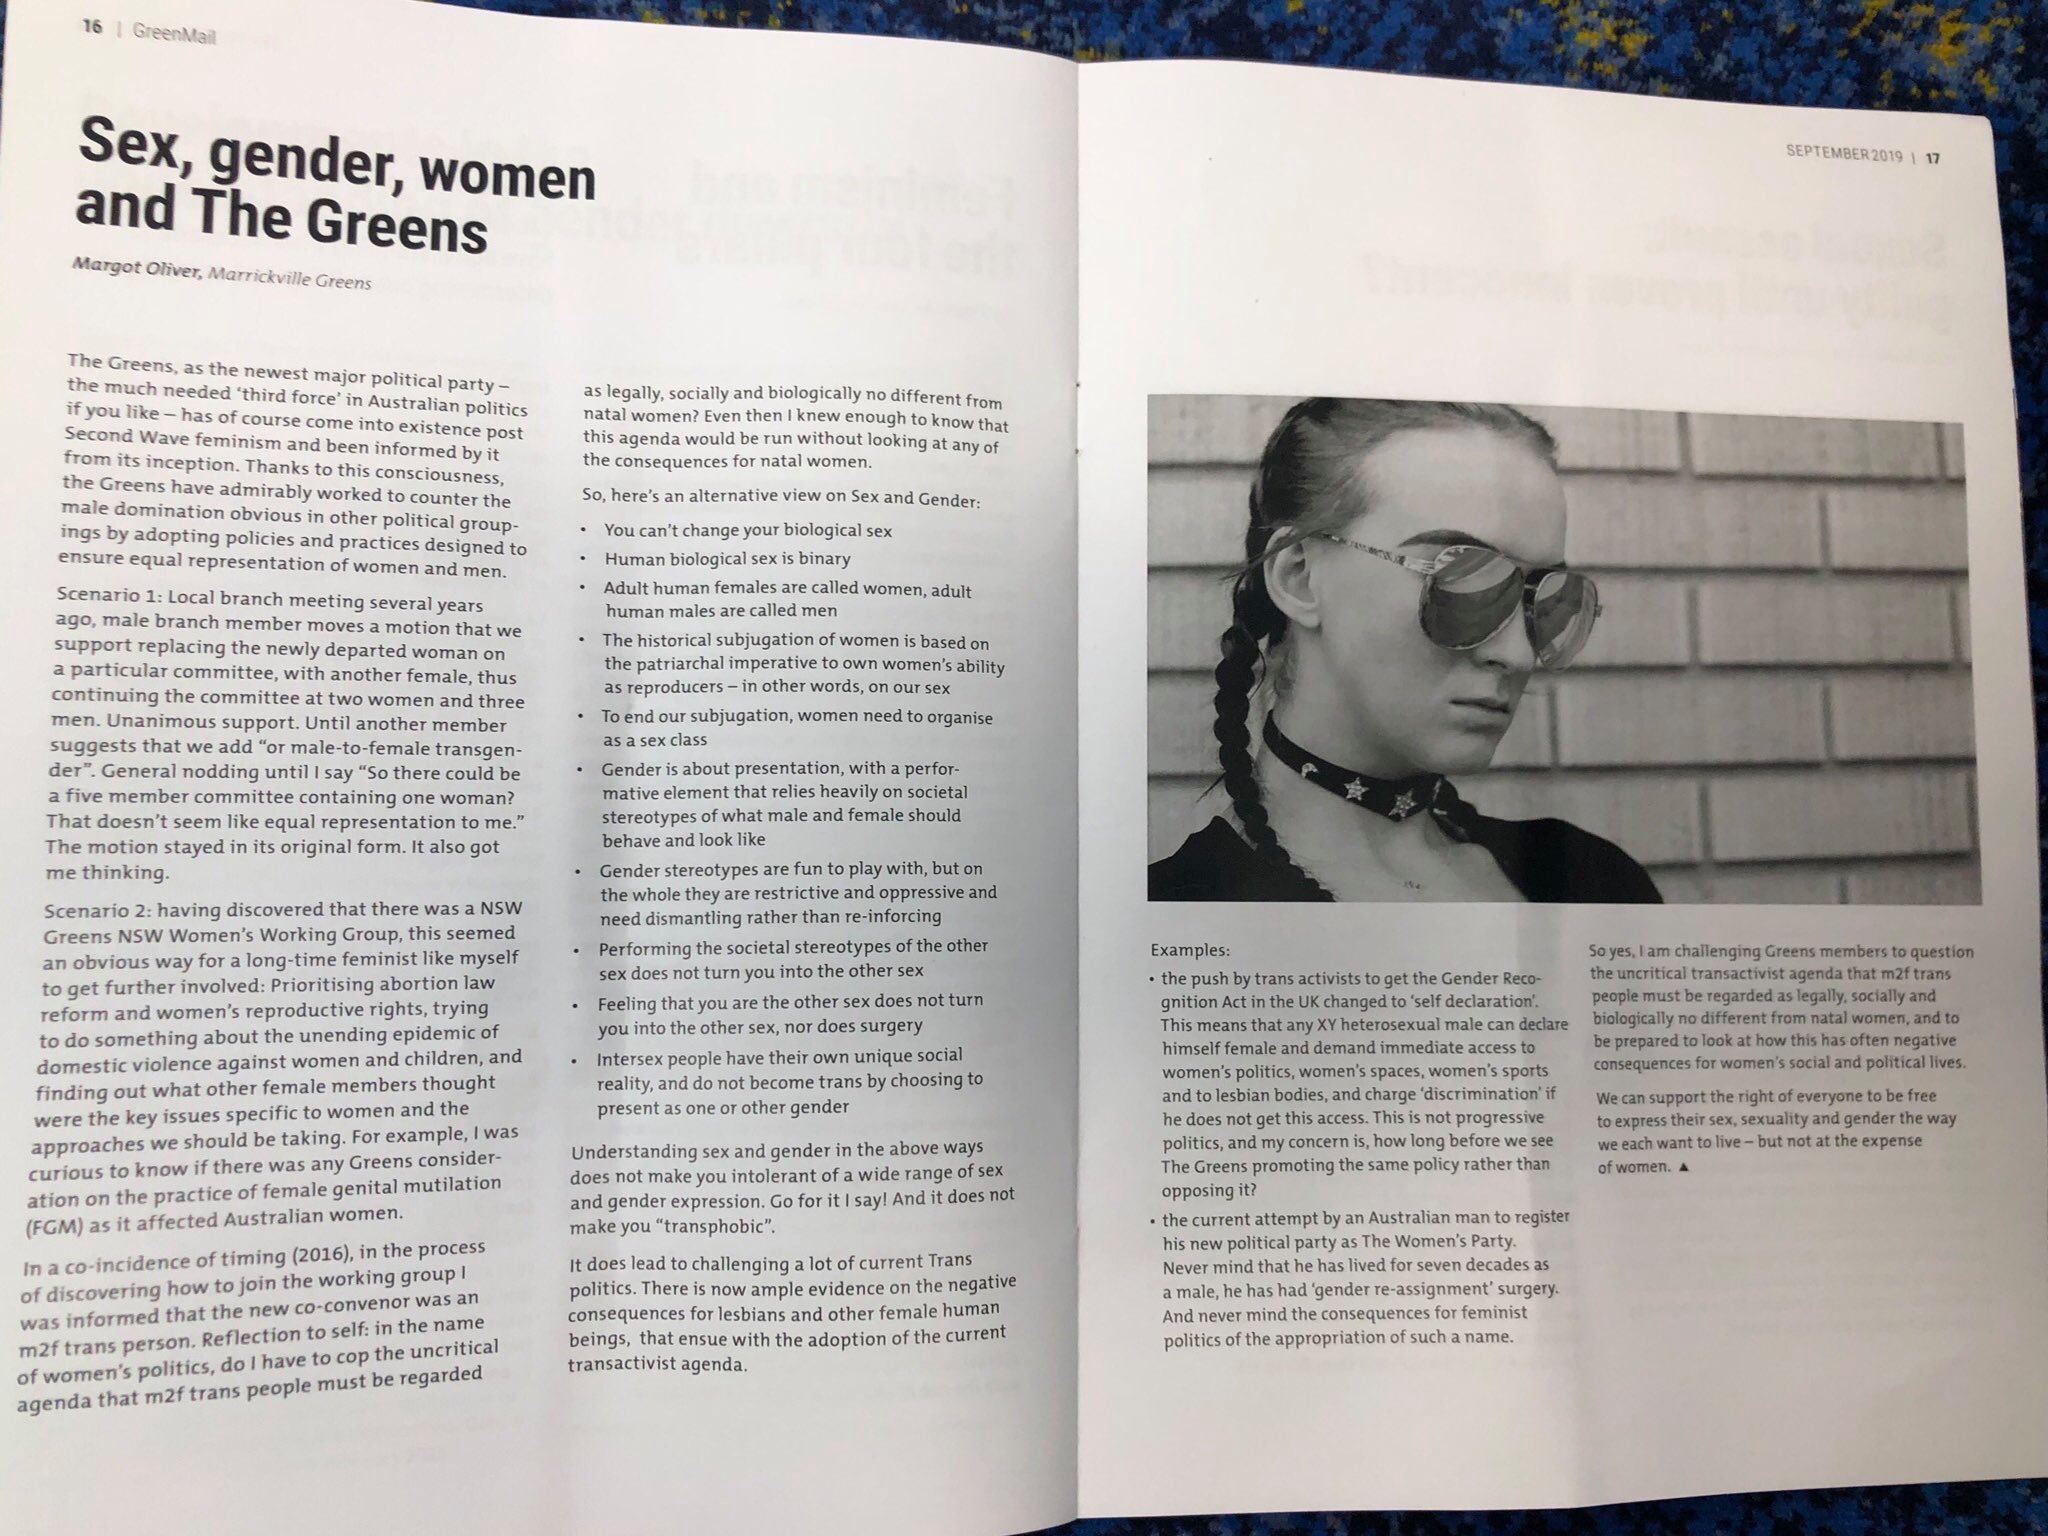 NSW Greens apologise over anti-trans article in party magazine